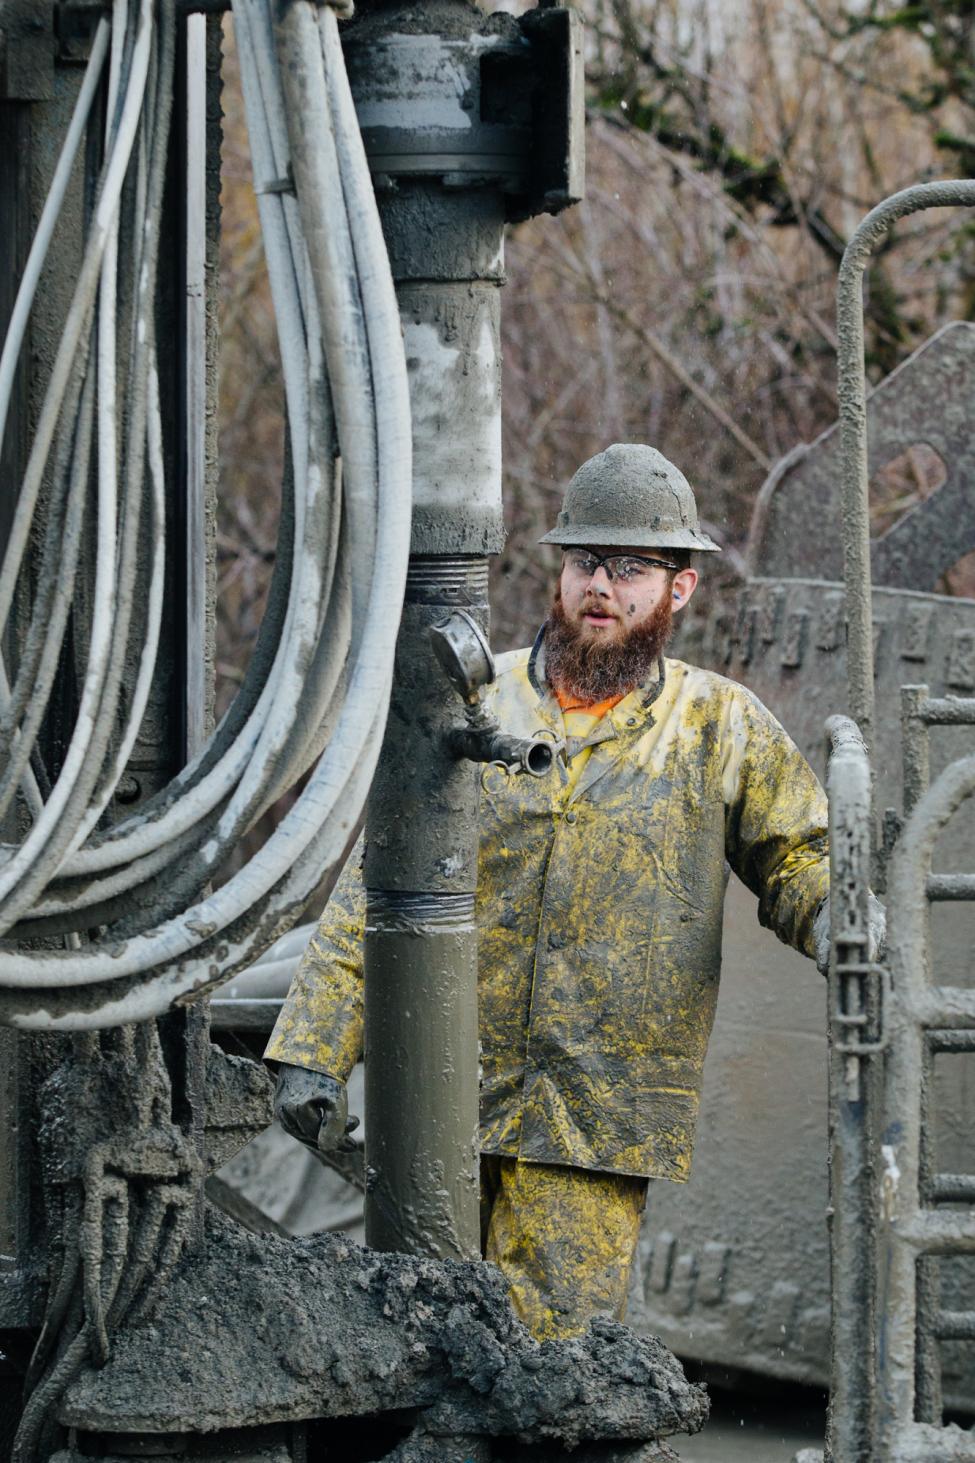 2018 in review: a worker covered in mud next to a drilling rig